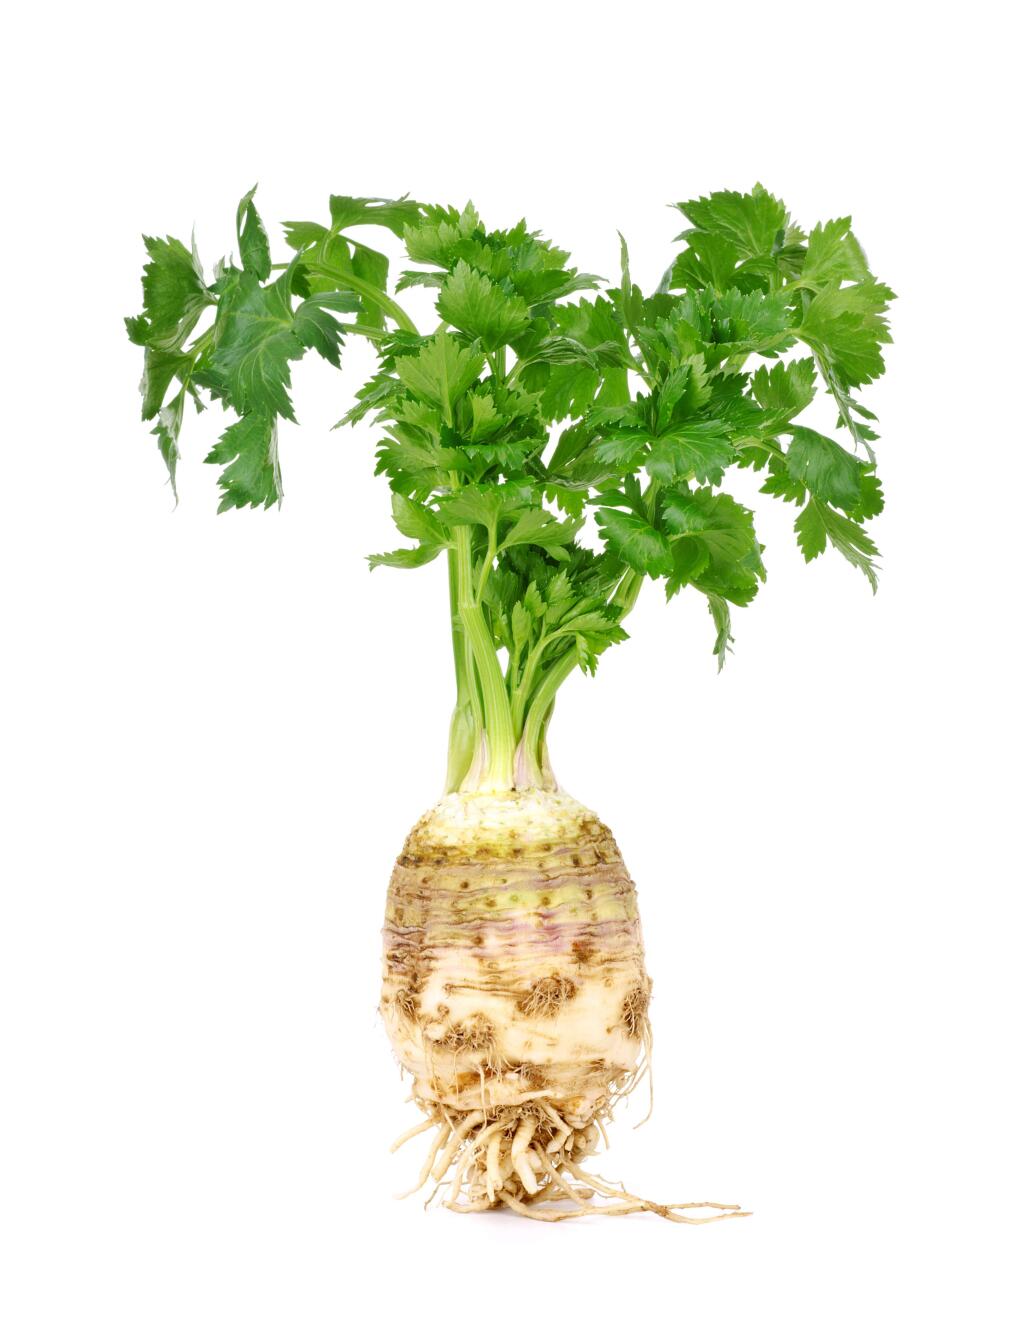 Celery root is a gourmet treat - ignored by most American chefs.